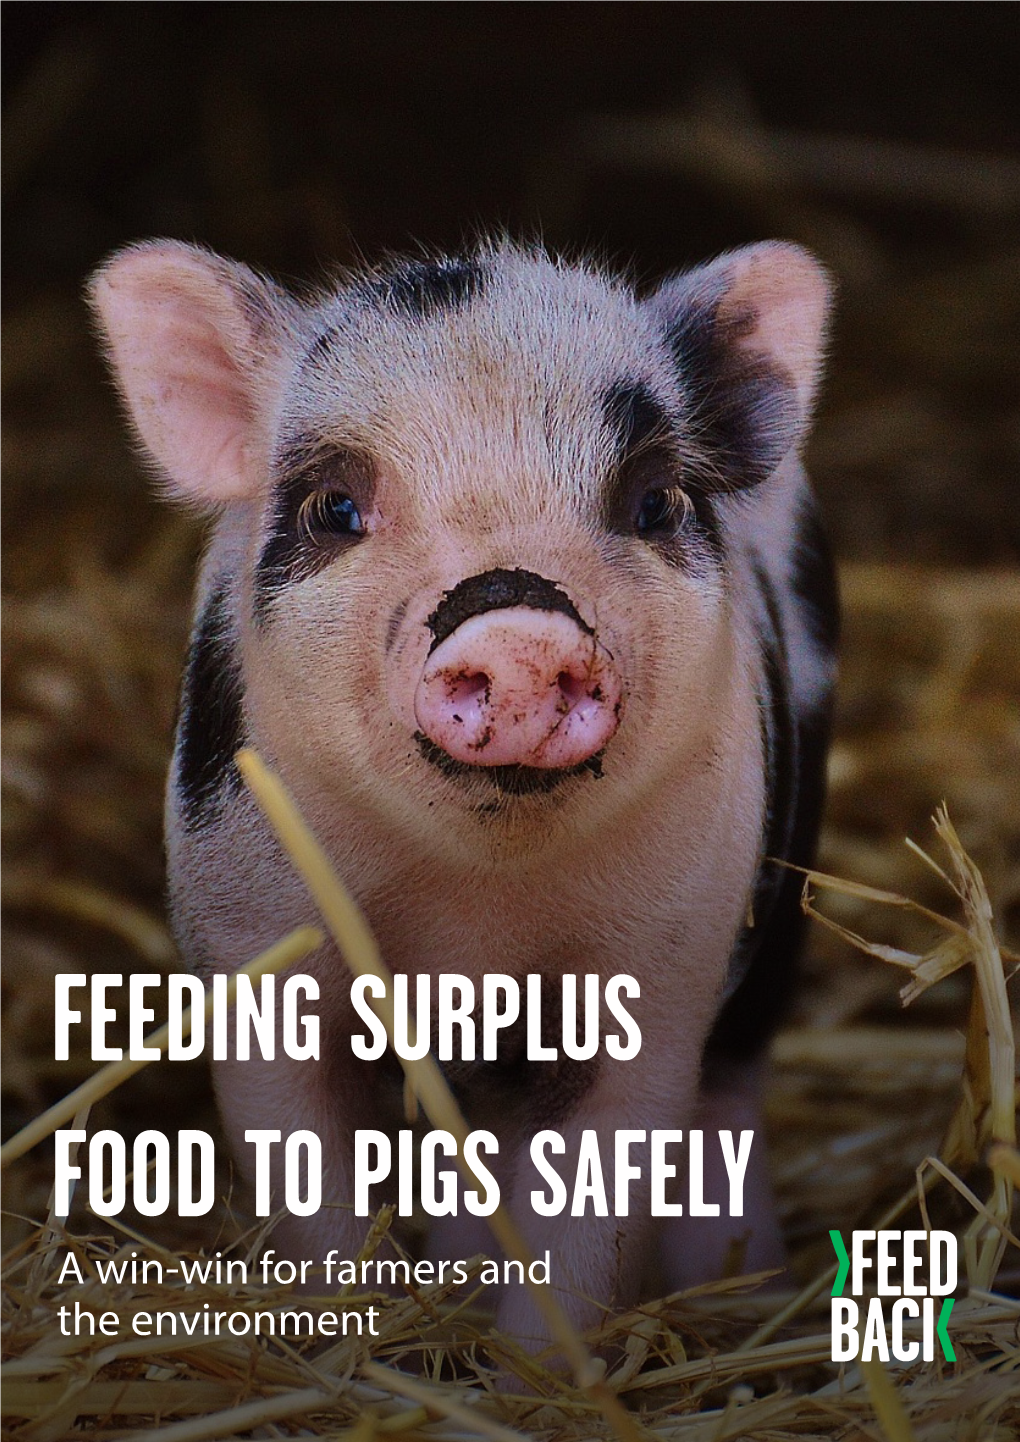 Feeding Surplus Food to Pigs Safely: a Win-Win for Farmers and the Environment London: Feedback